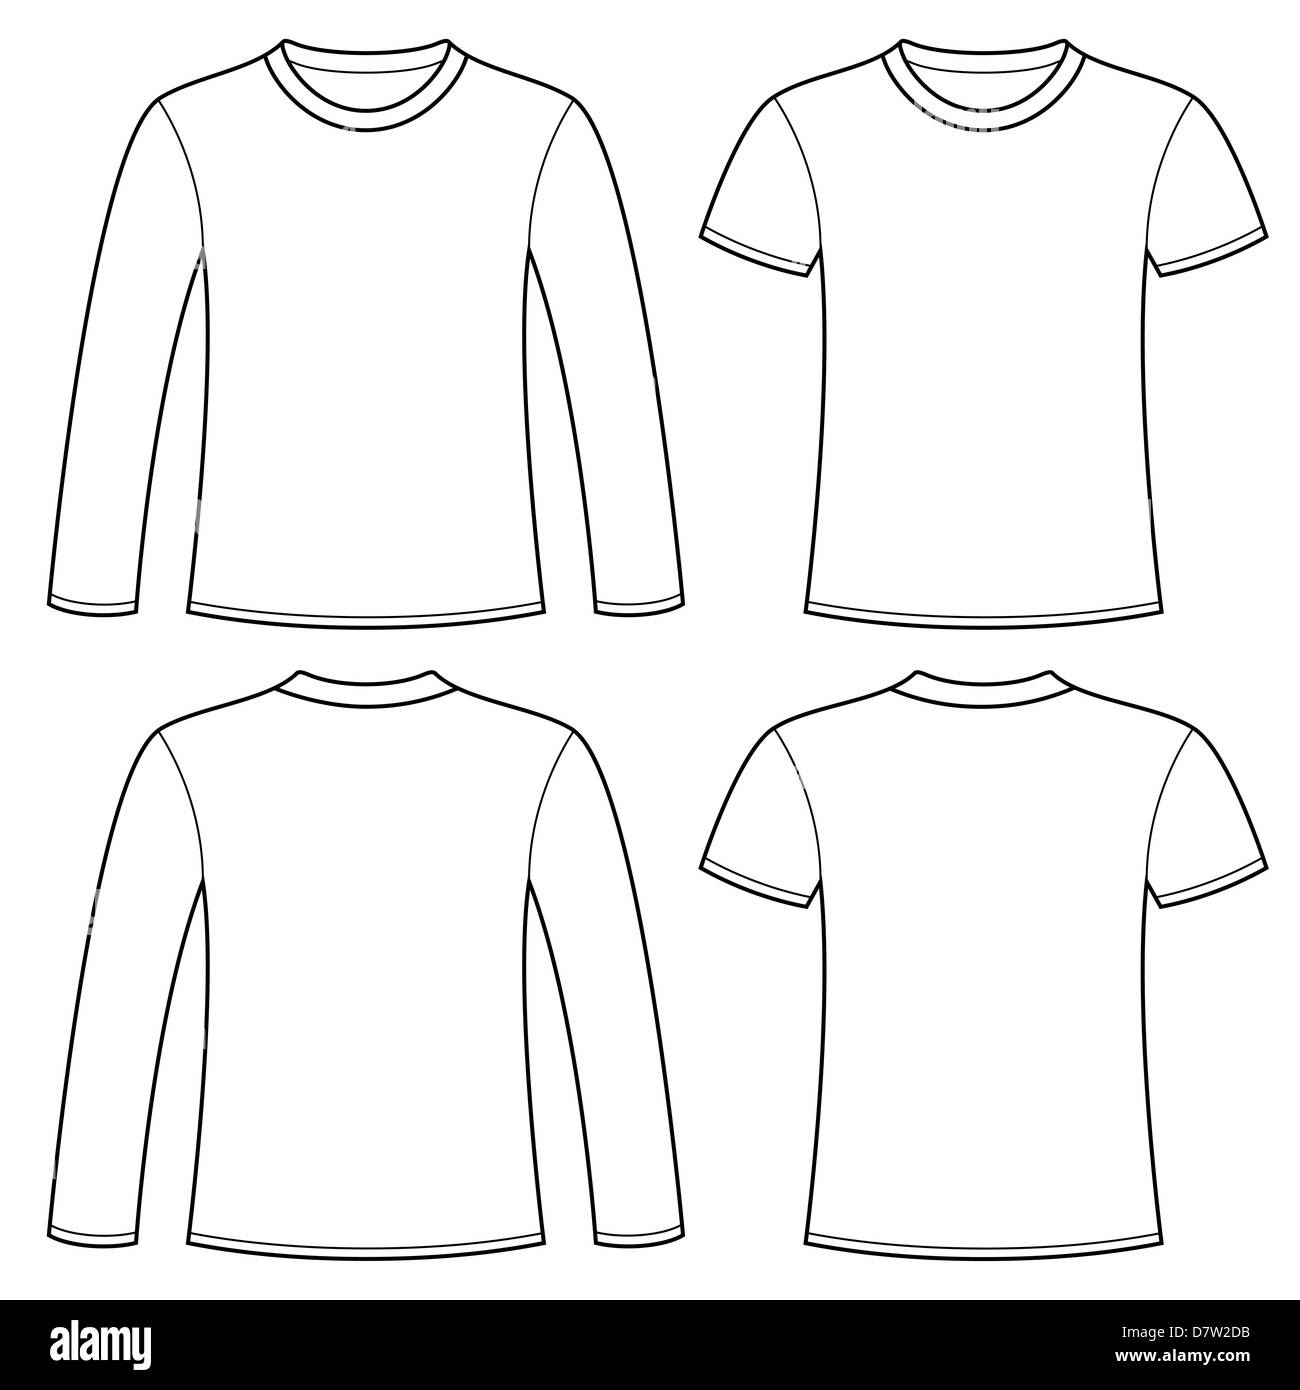 Polo Shirt Back Black and White Stock Photos & Images - Alamy Regarding Blank T Shirt Outline Template